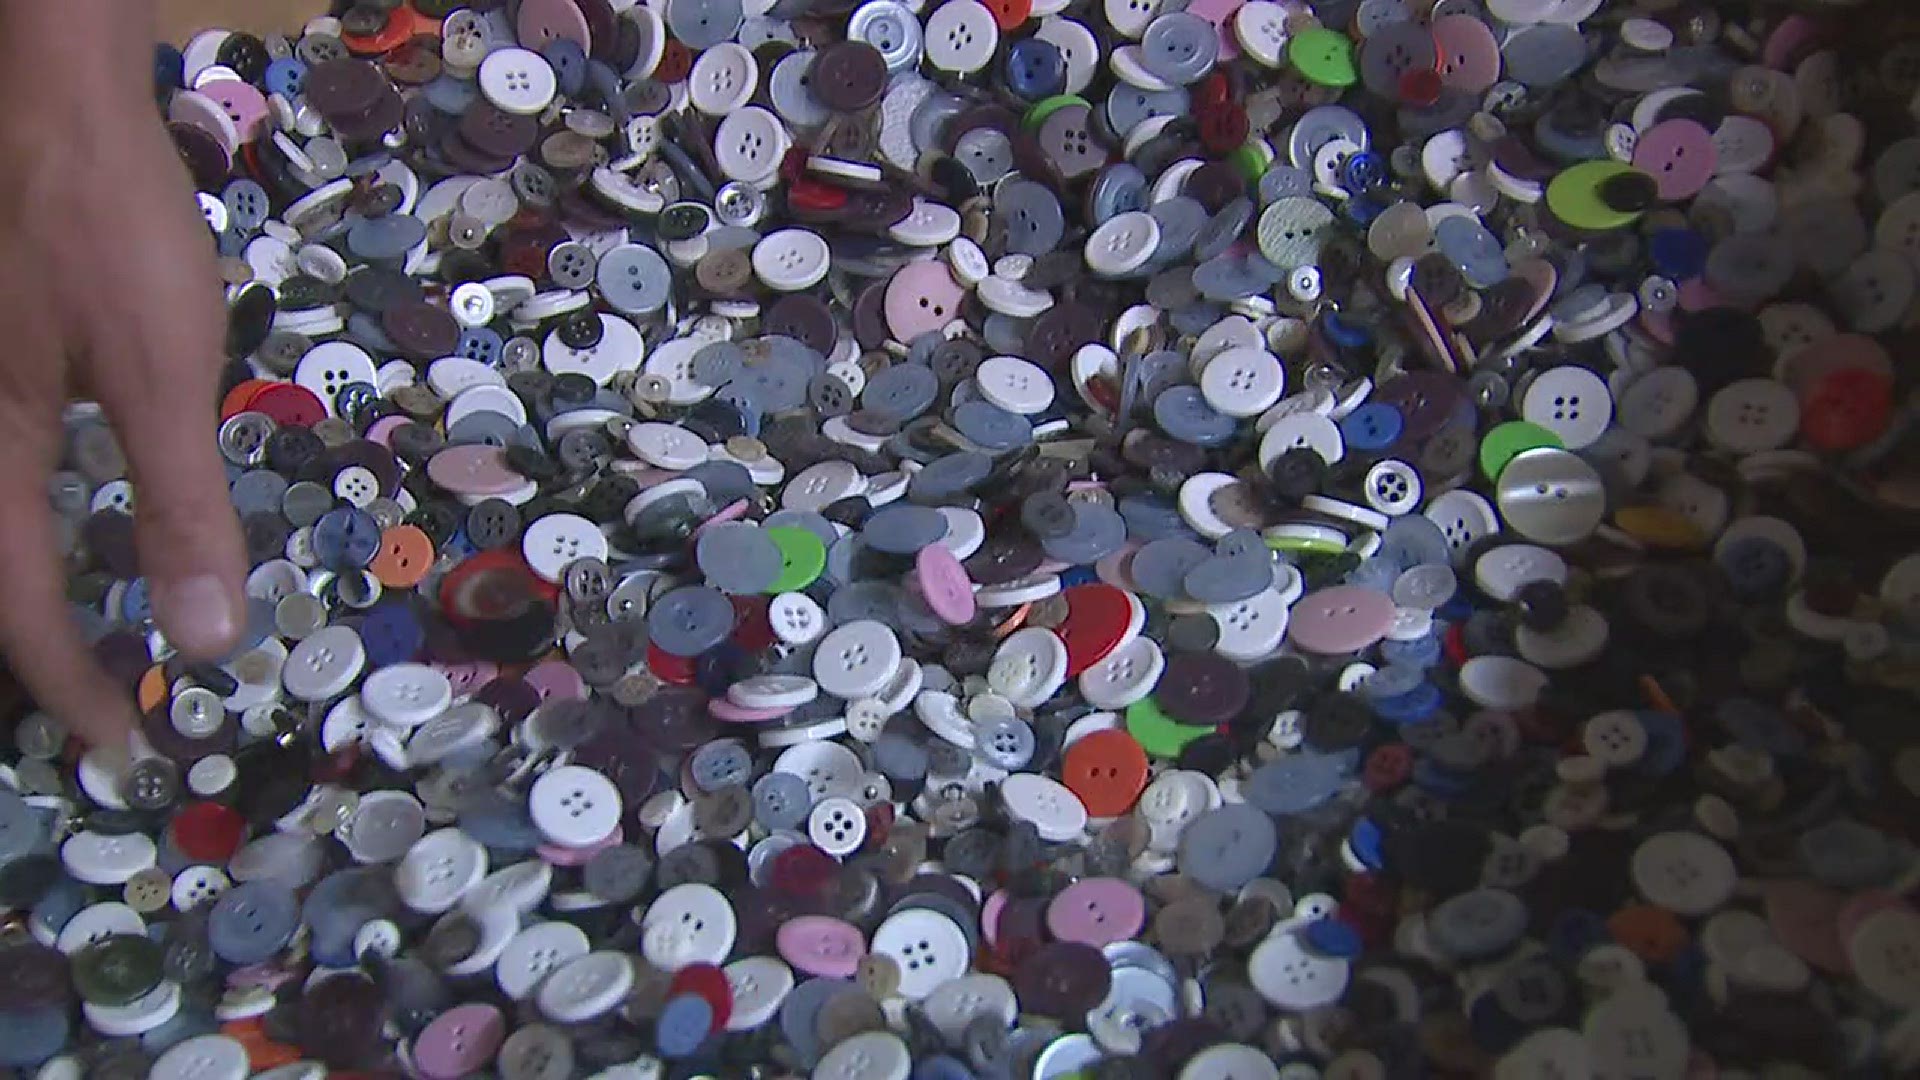 This warehouse is part of an old button factory built in 1886, containing millions of buttons.